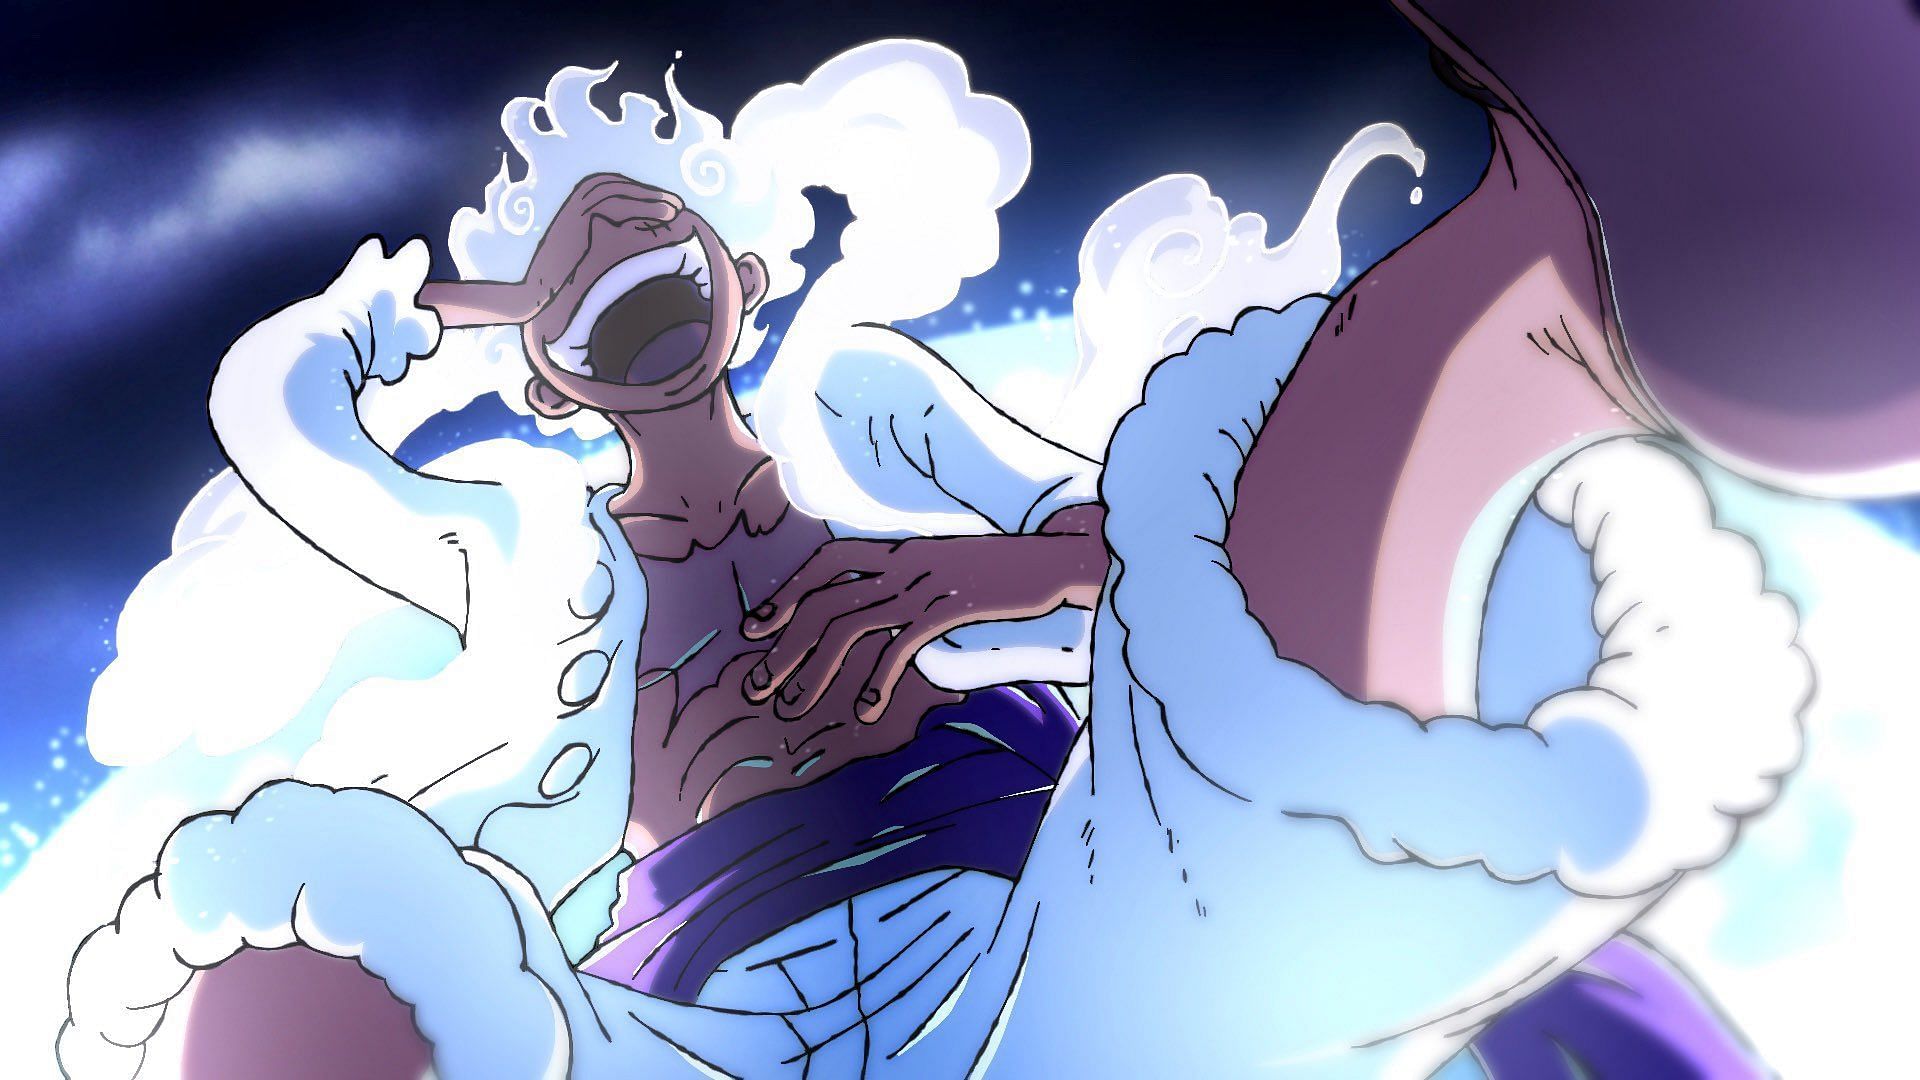 Here is an Official First Look at Luffy's Gear 5 in One Piece Anime